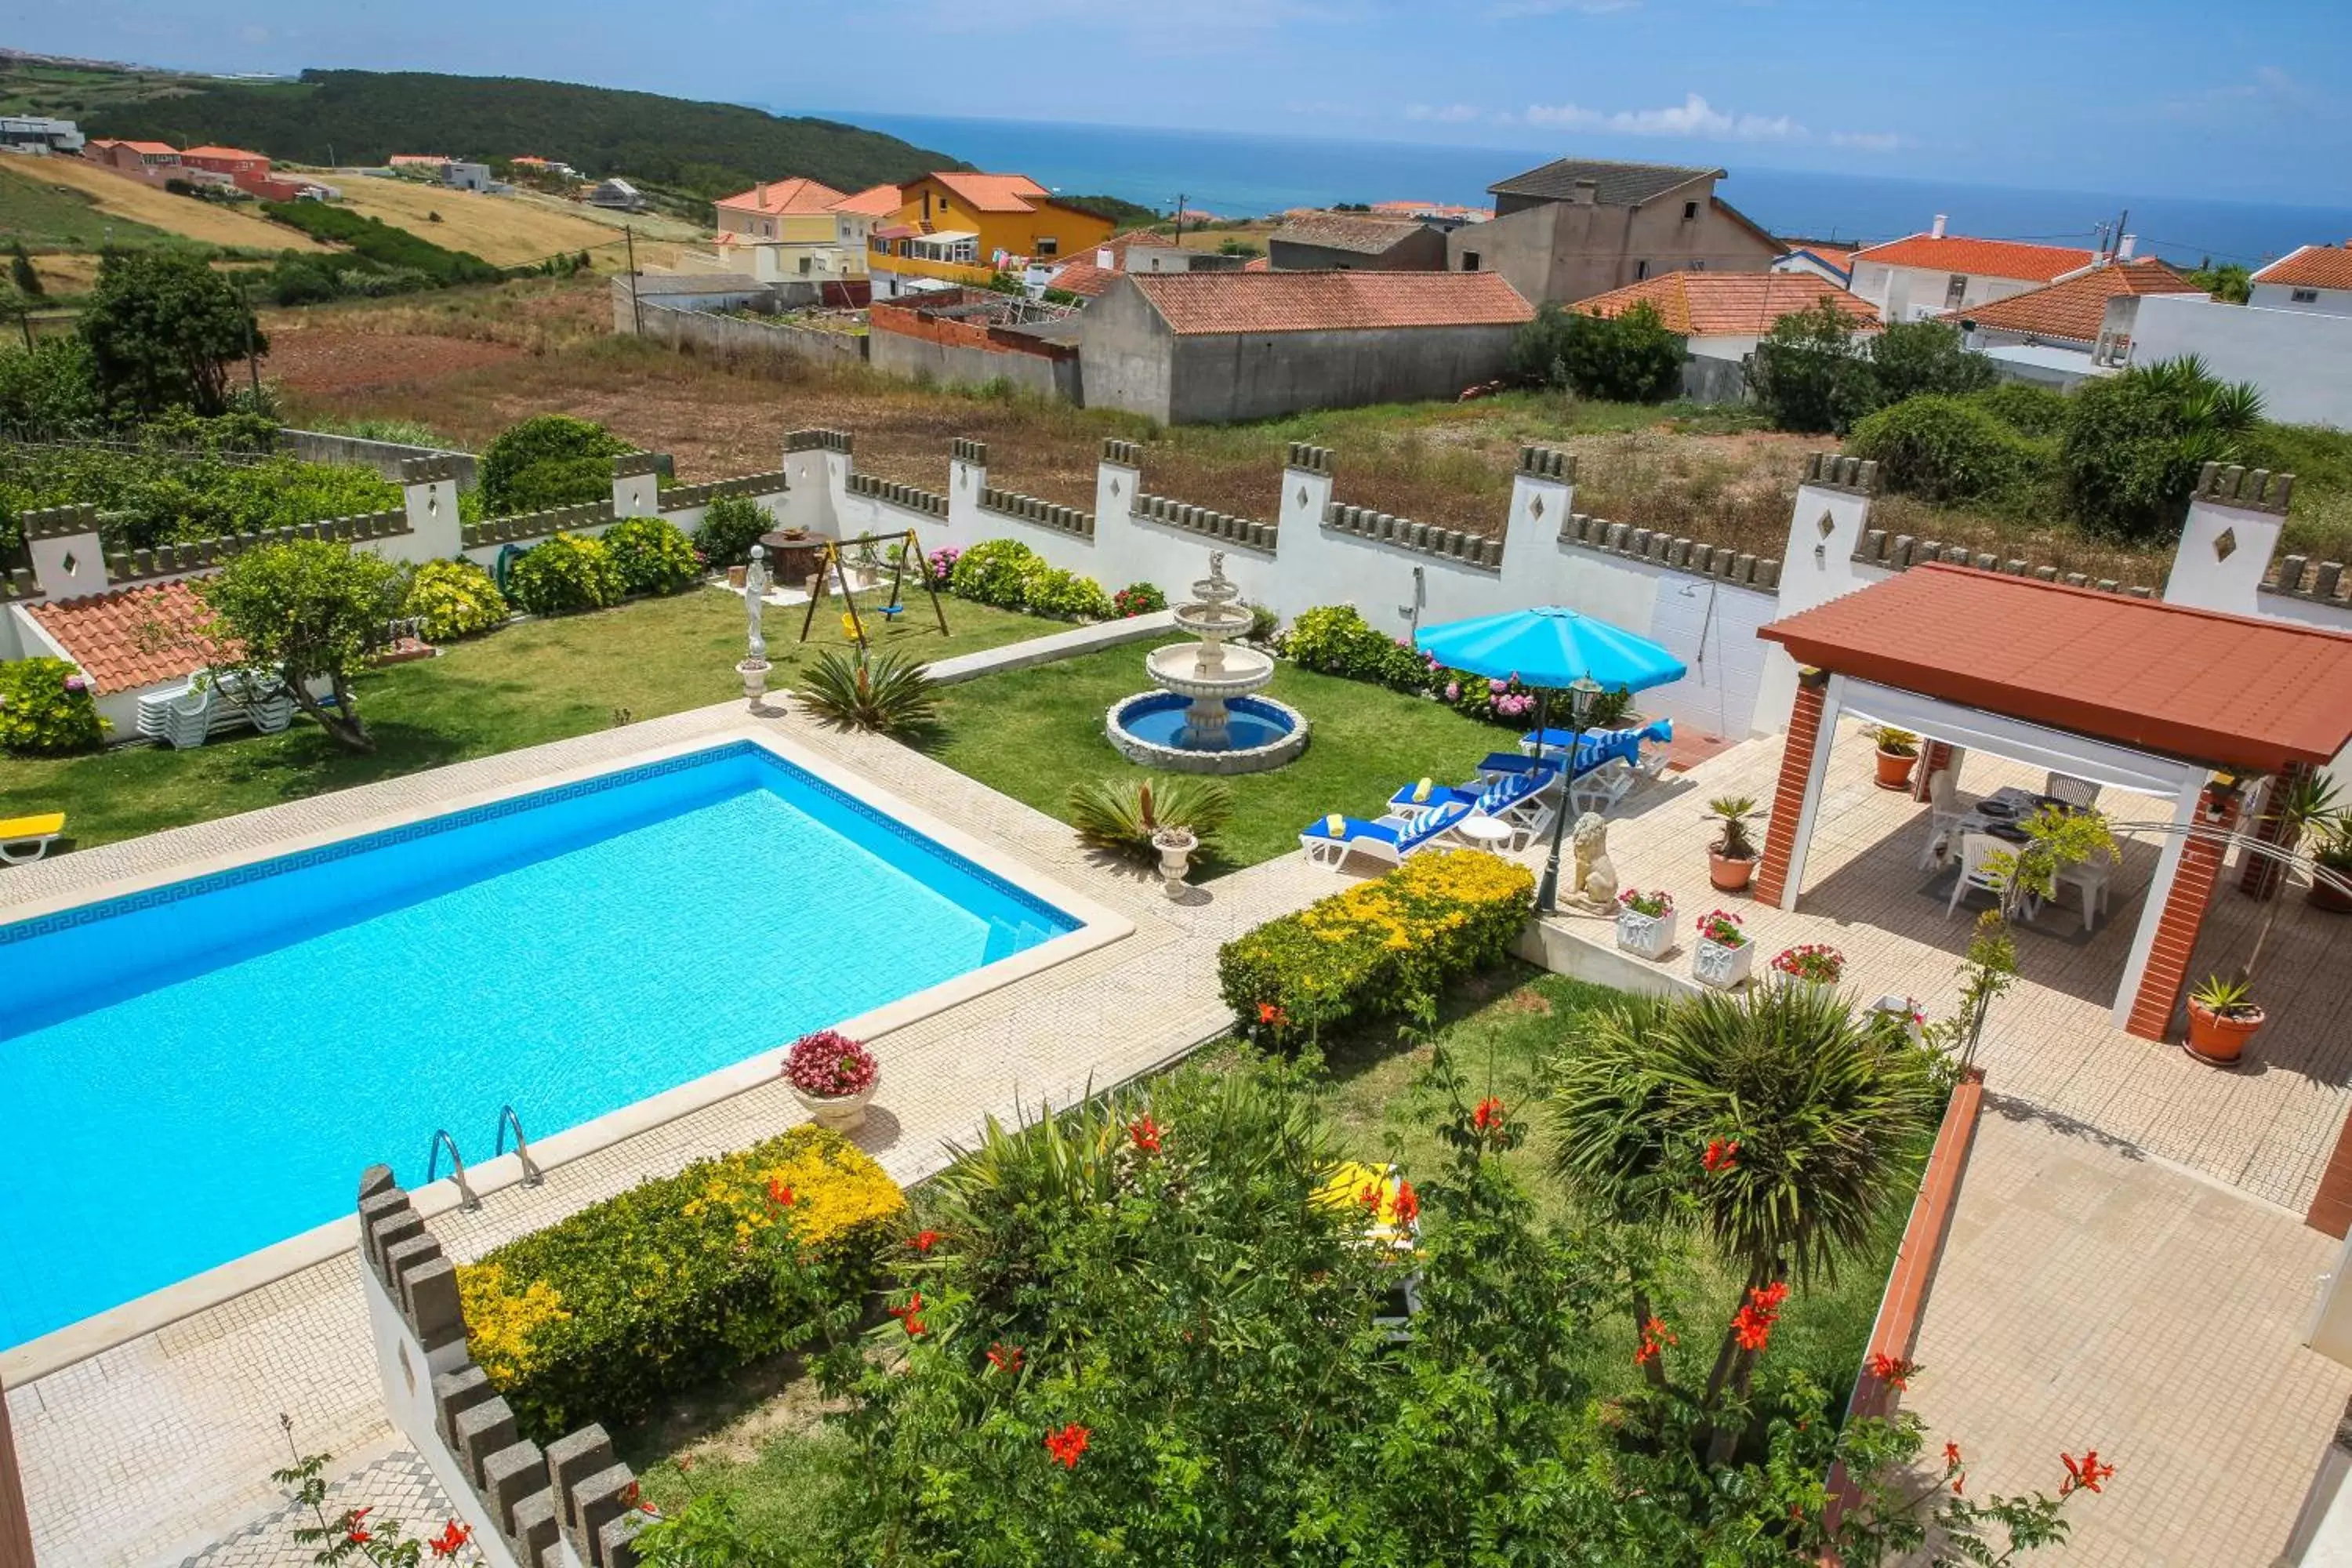 Property building, Pool View in Pata da Gaivota Boutique House